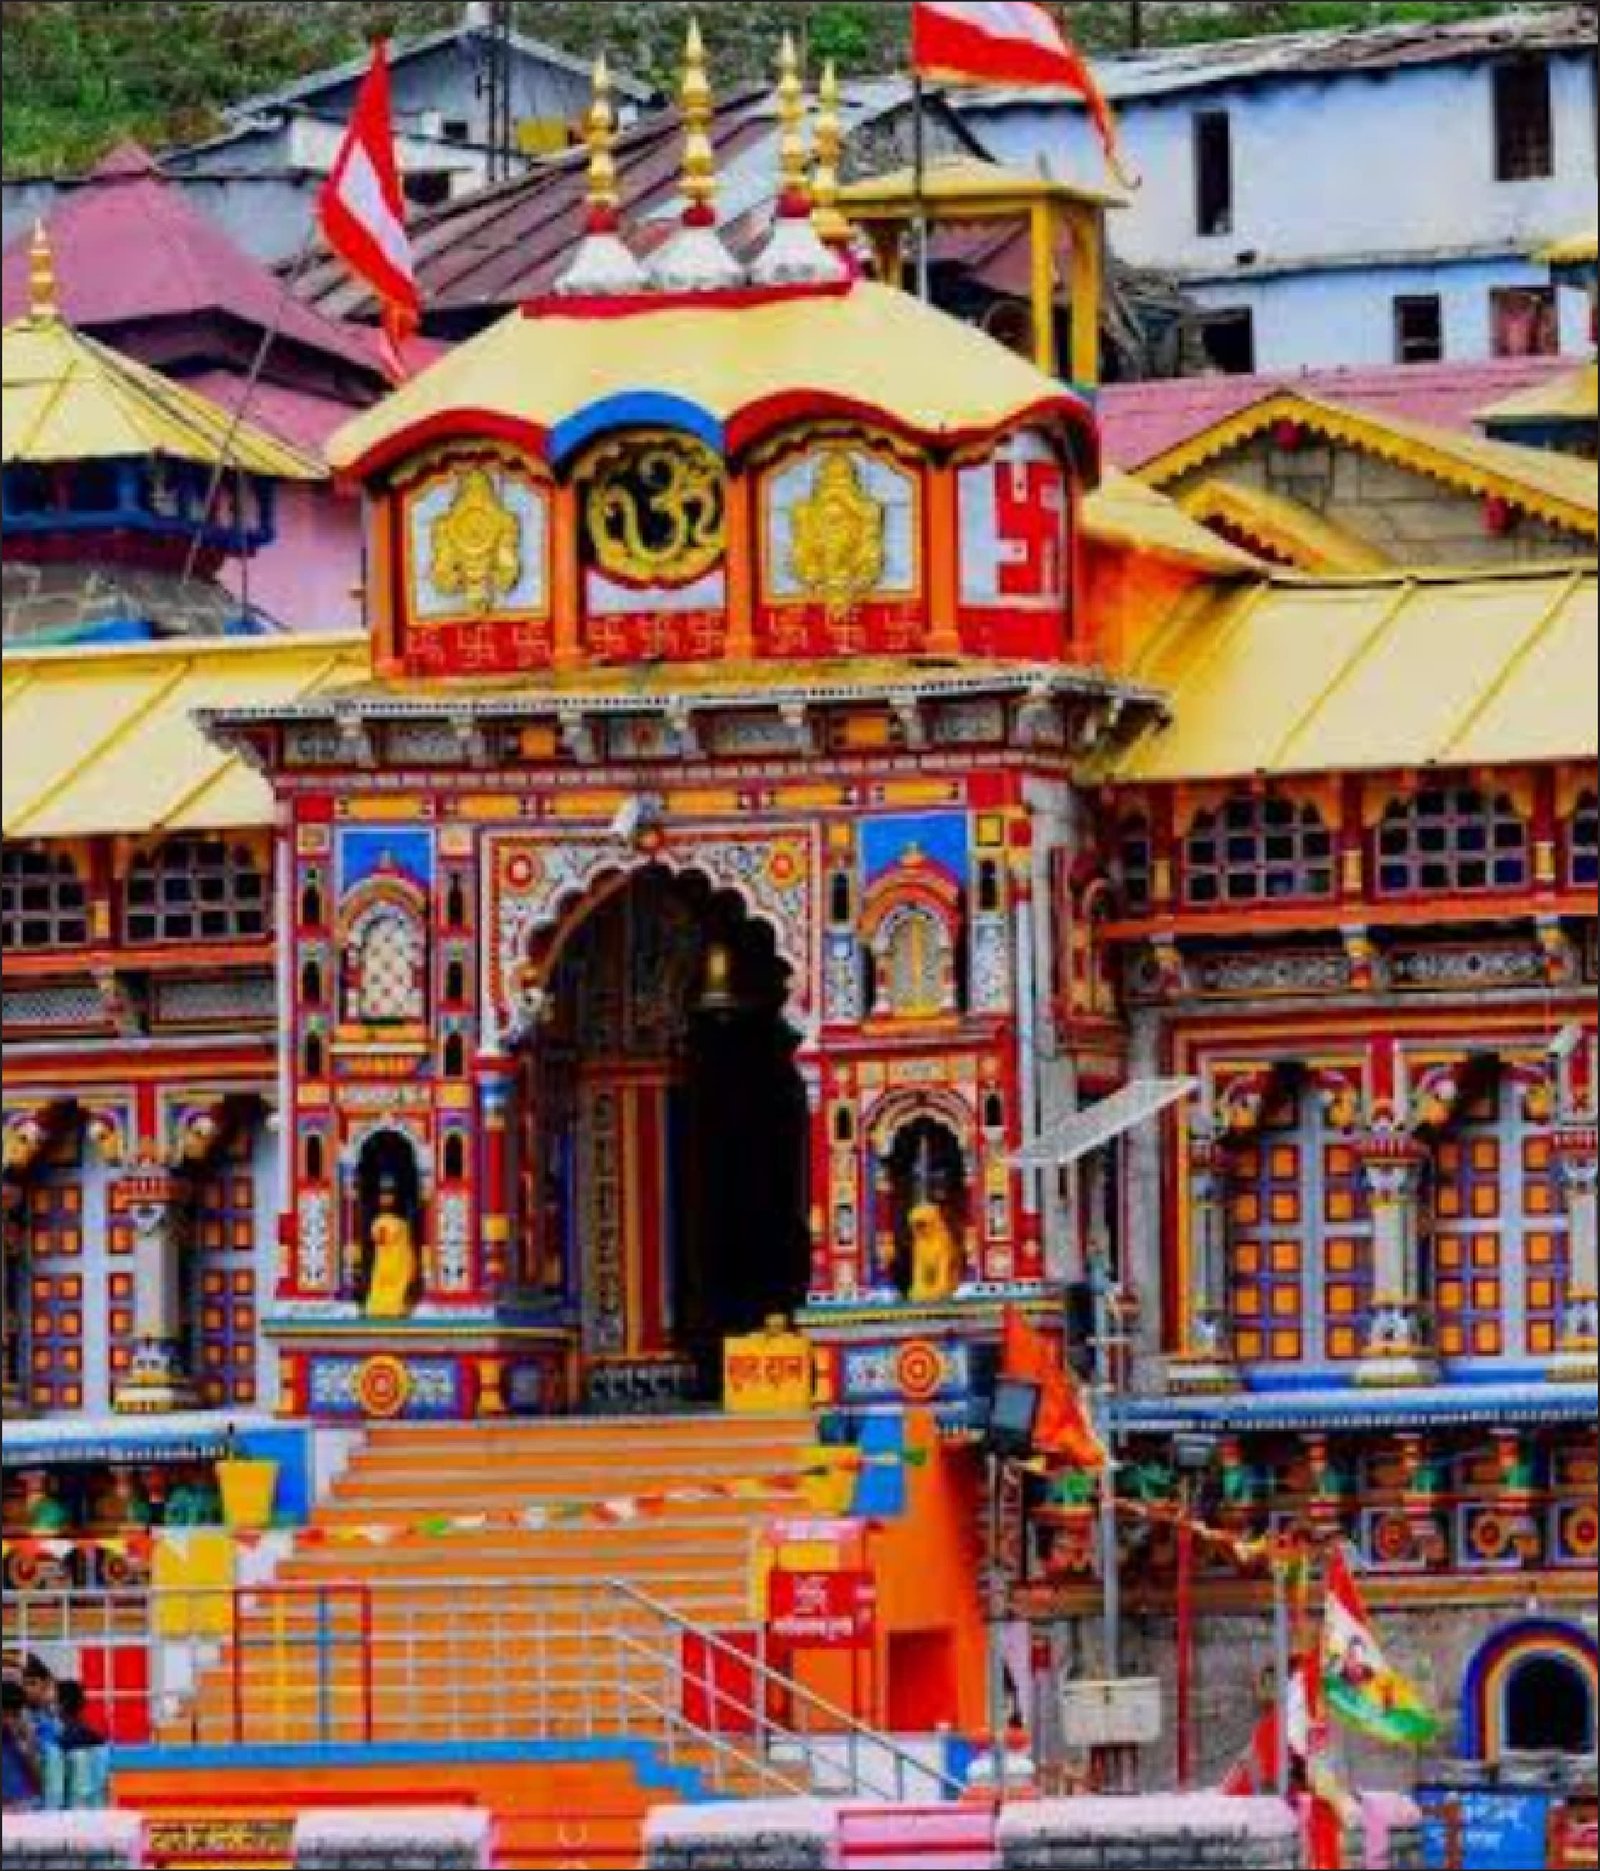 Chardham Yatra Riverside Blessings - Sacred rituals by the river